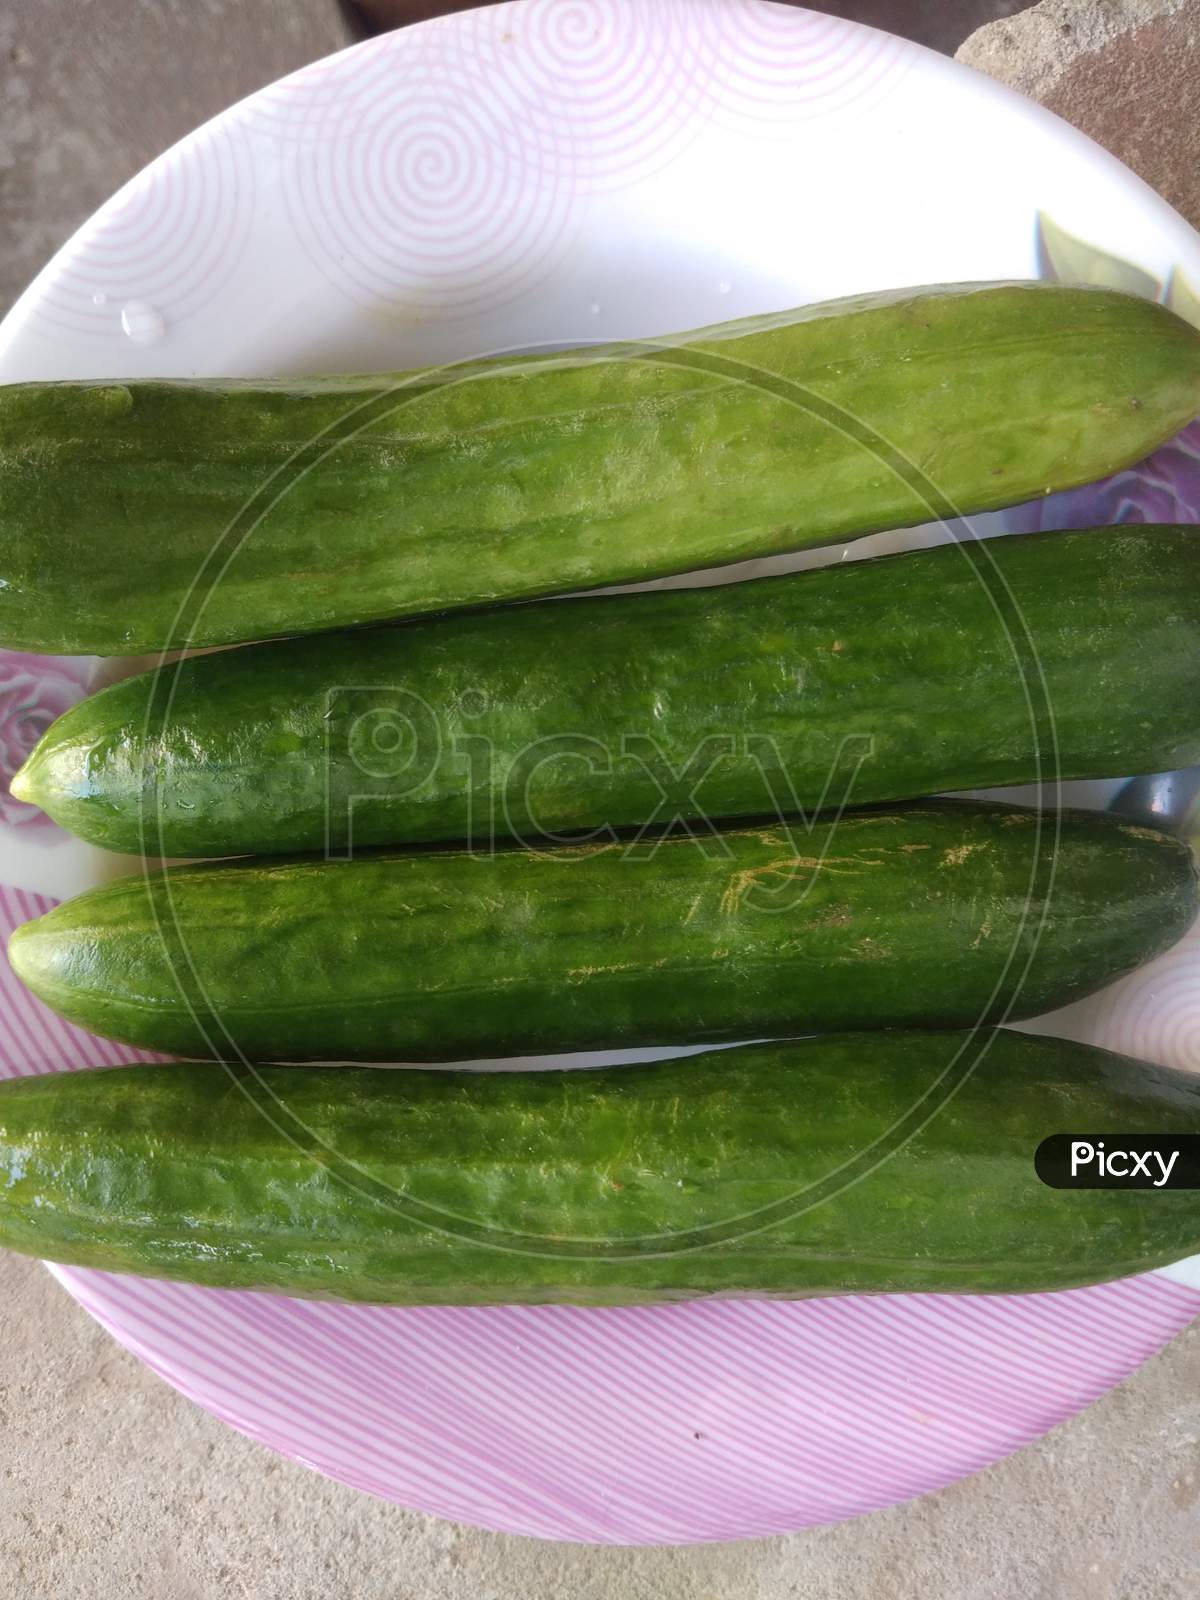 Cucumbers, in the summer, in the day time, in mirpur Azad Kashmir.